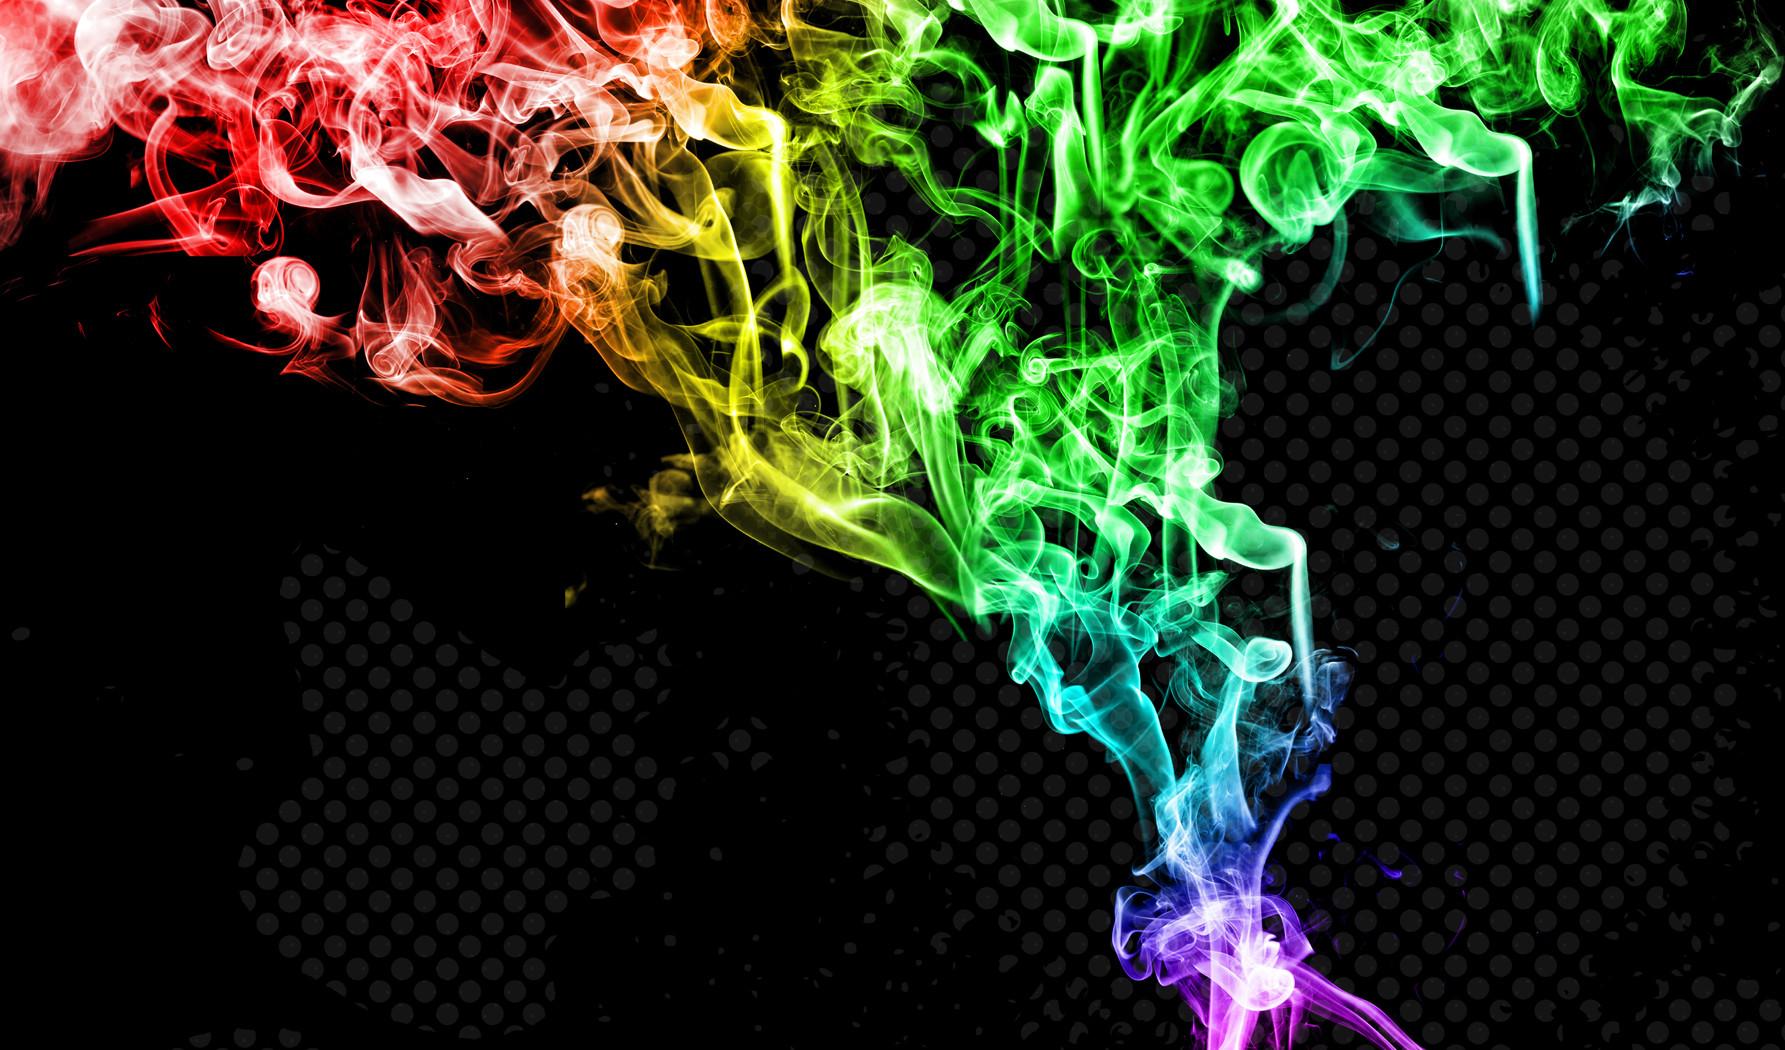 New Smoke Wallpapers In High Quality, Bilal Cud - Smoke Background , HD Wallpaper & Backgrounds